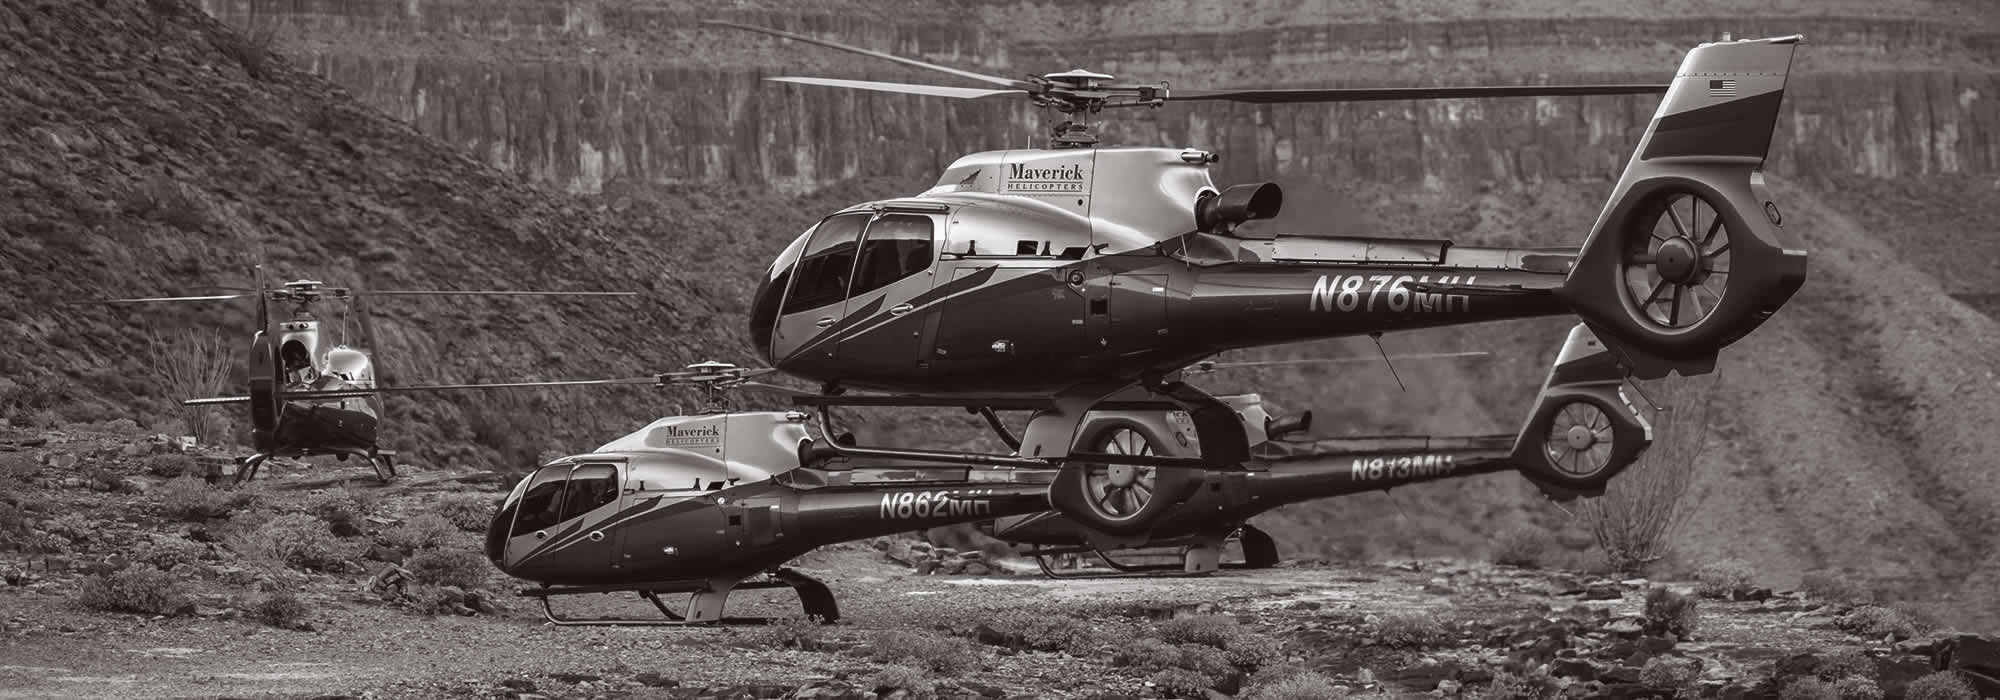 ECO-Star (EC130) Helicopters